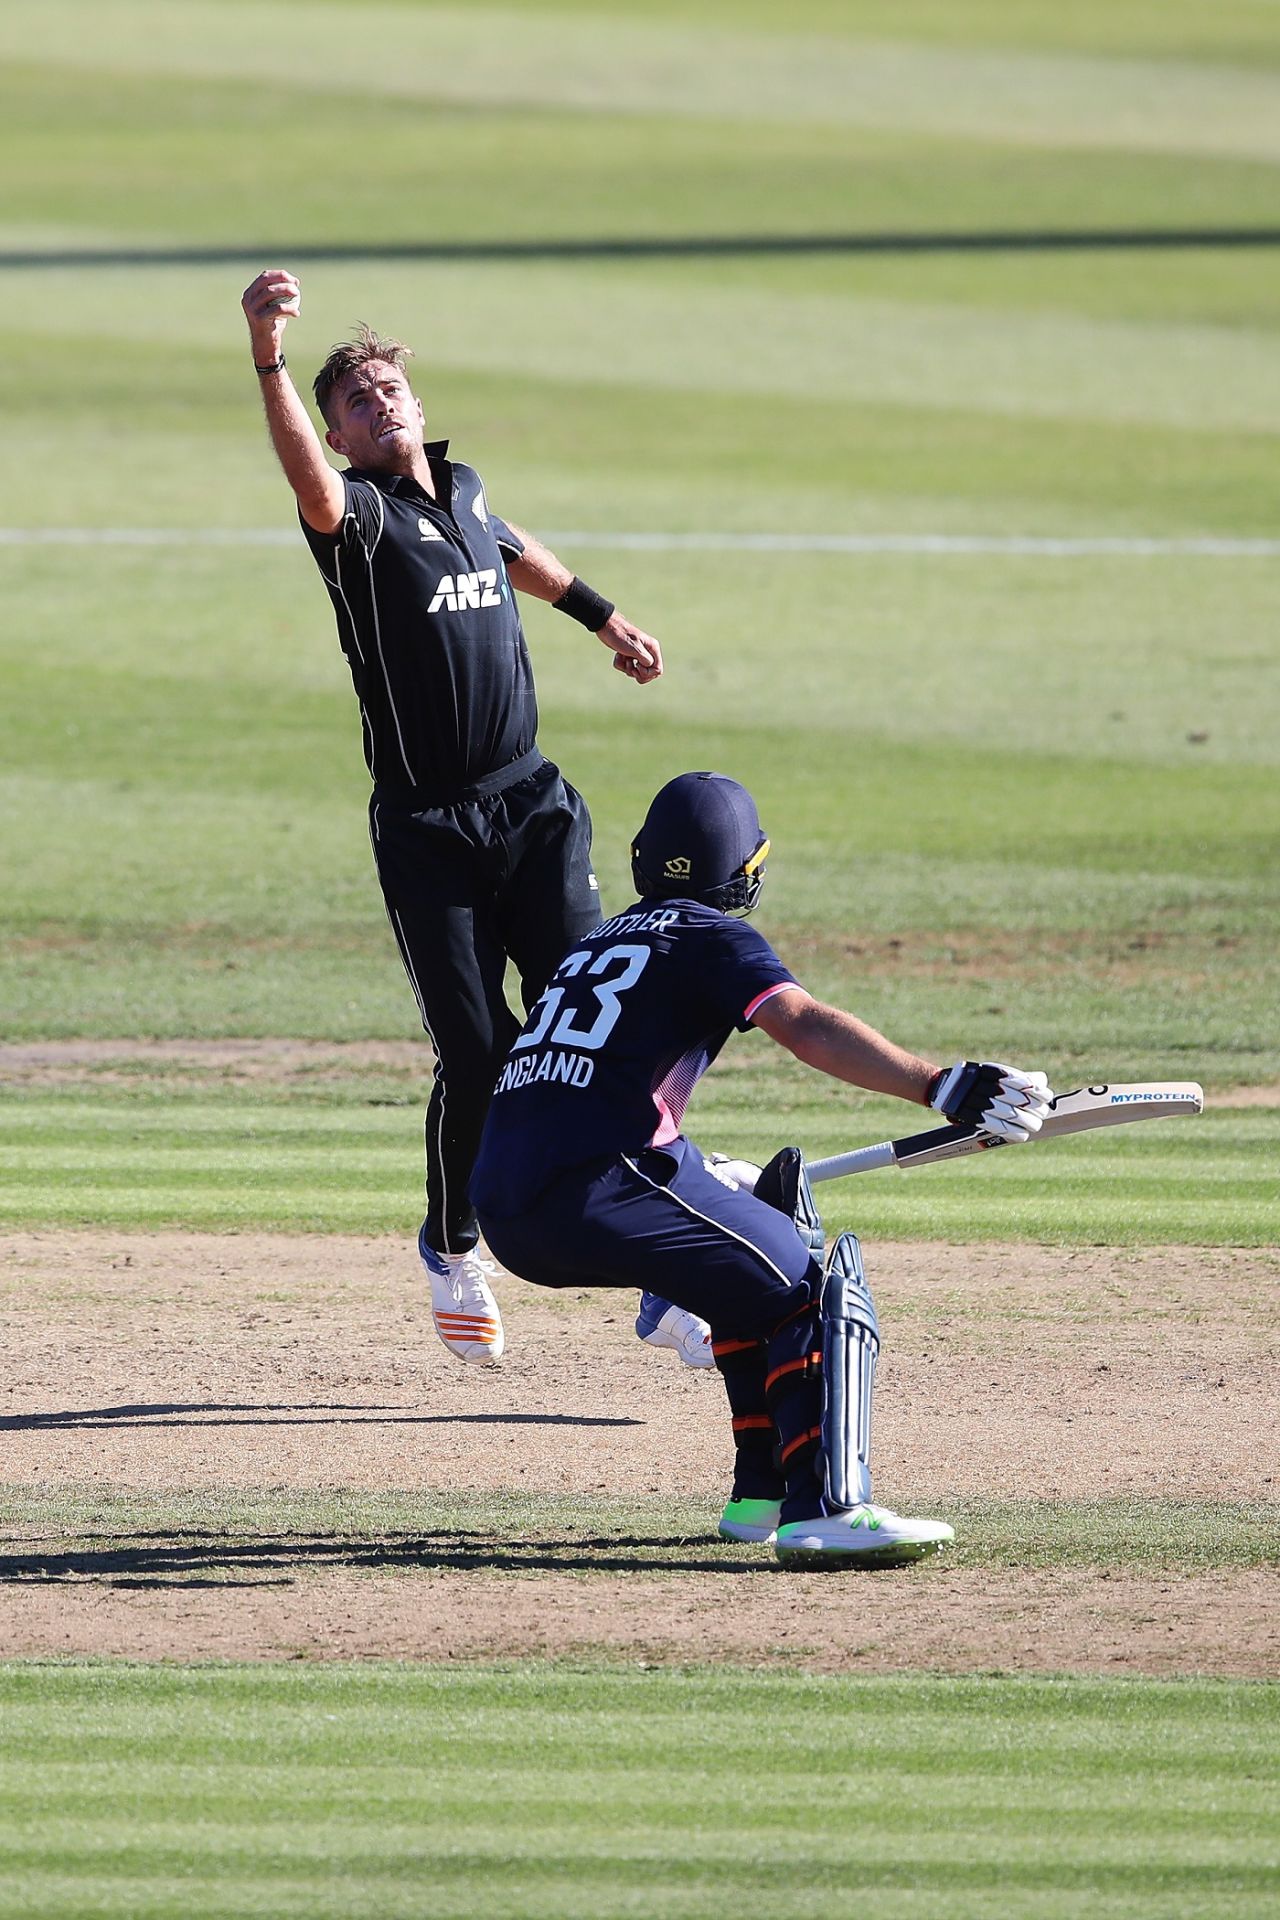 The first act in Tim Southee running out Jos Buttler, New Zealand v England, 1st ODI, Hamilton, 25 February, 2018